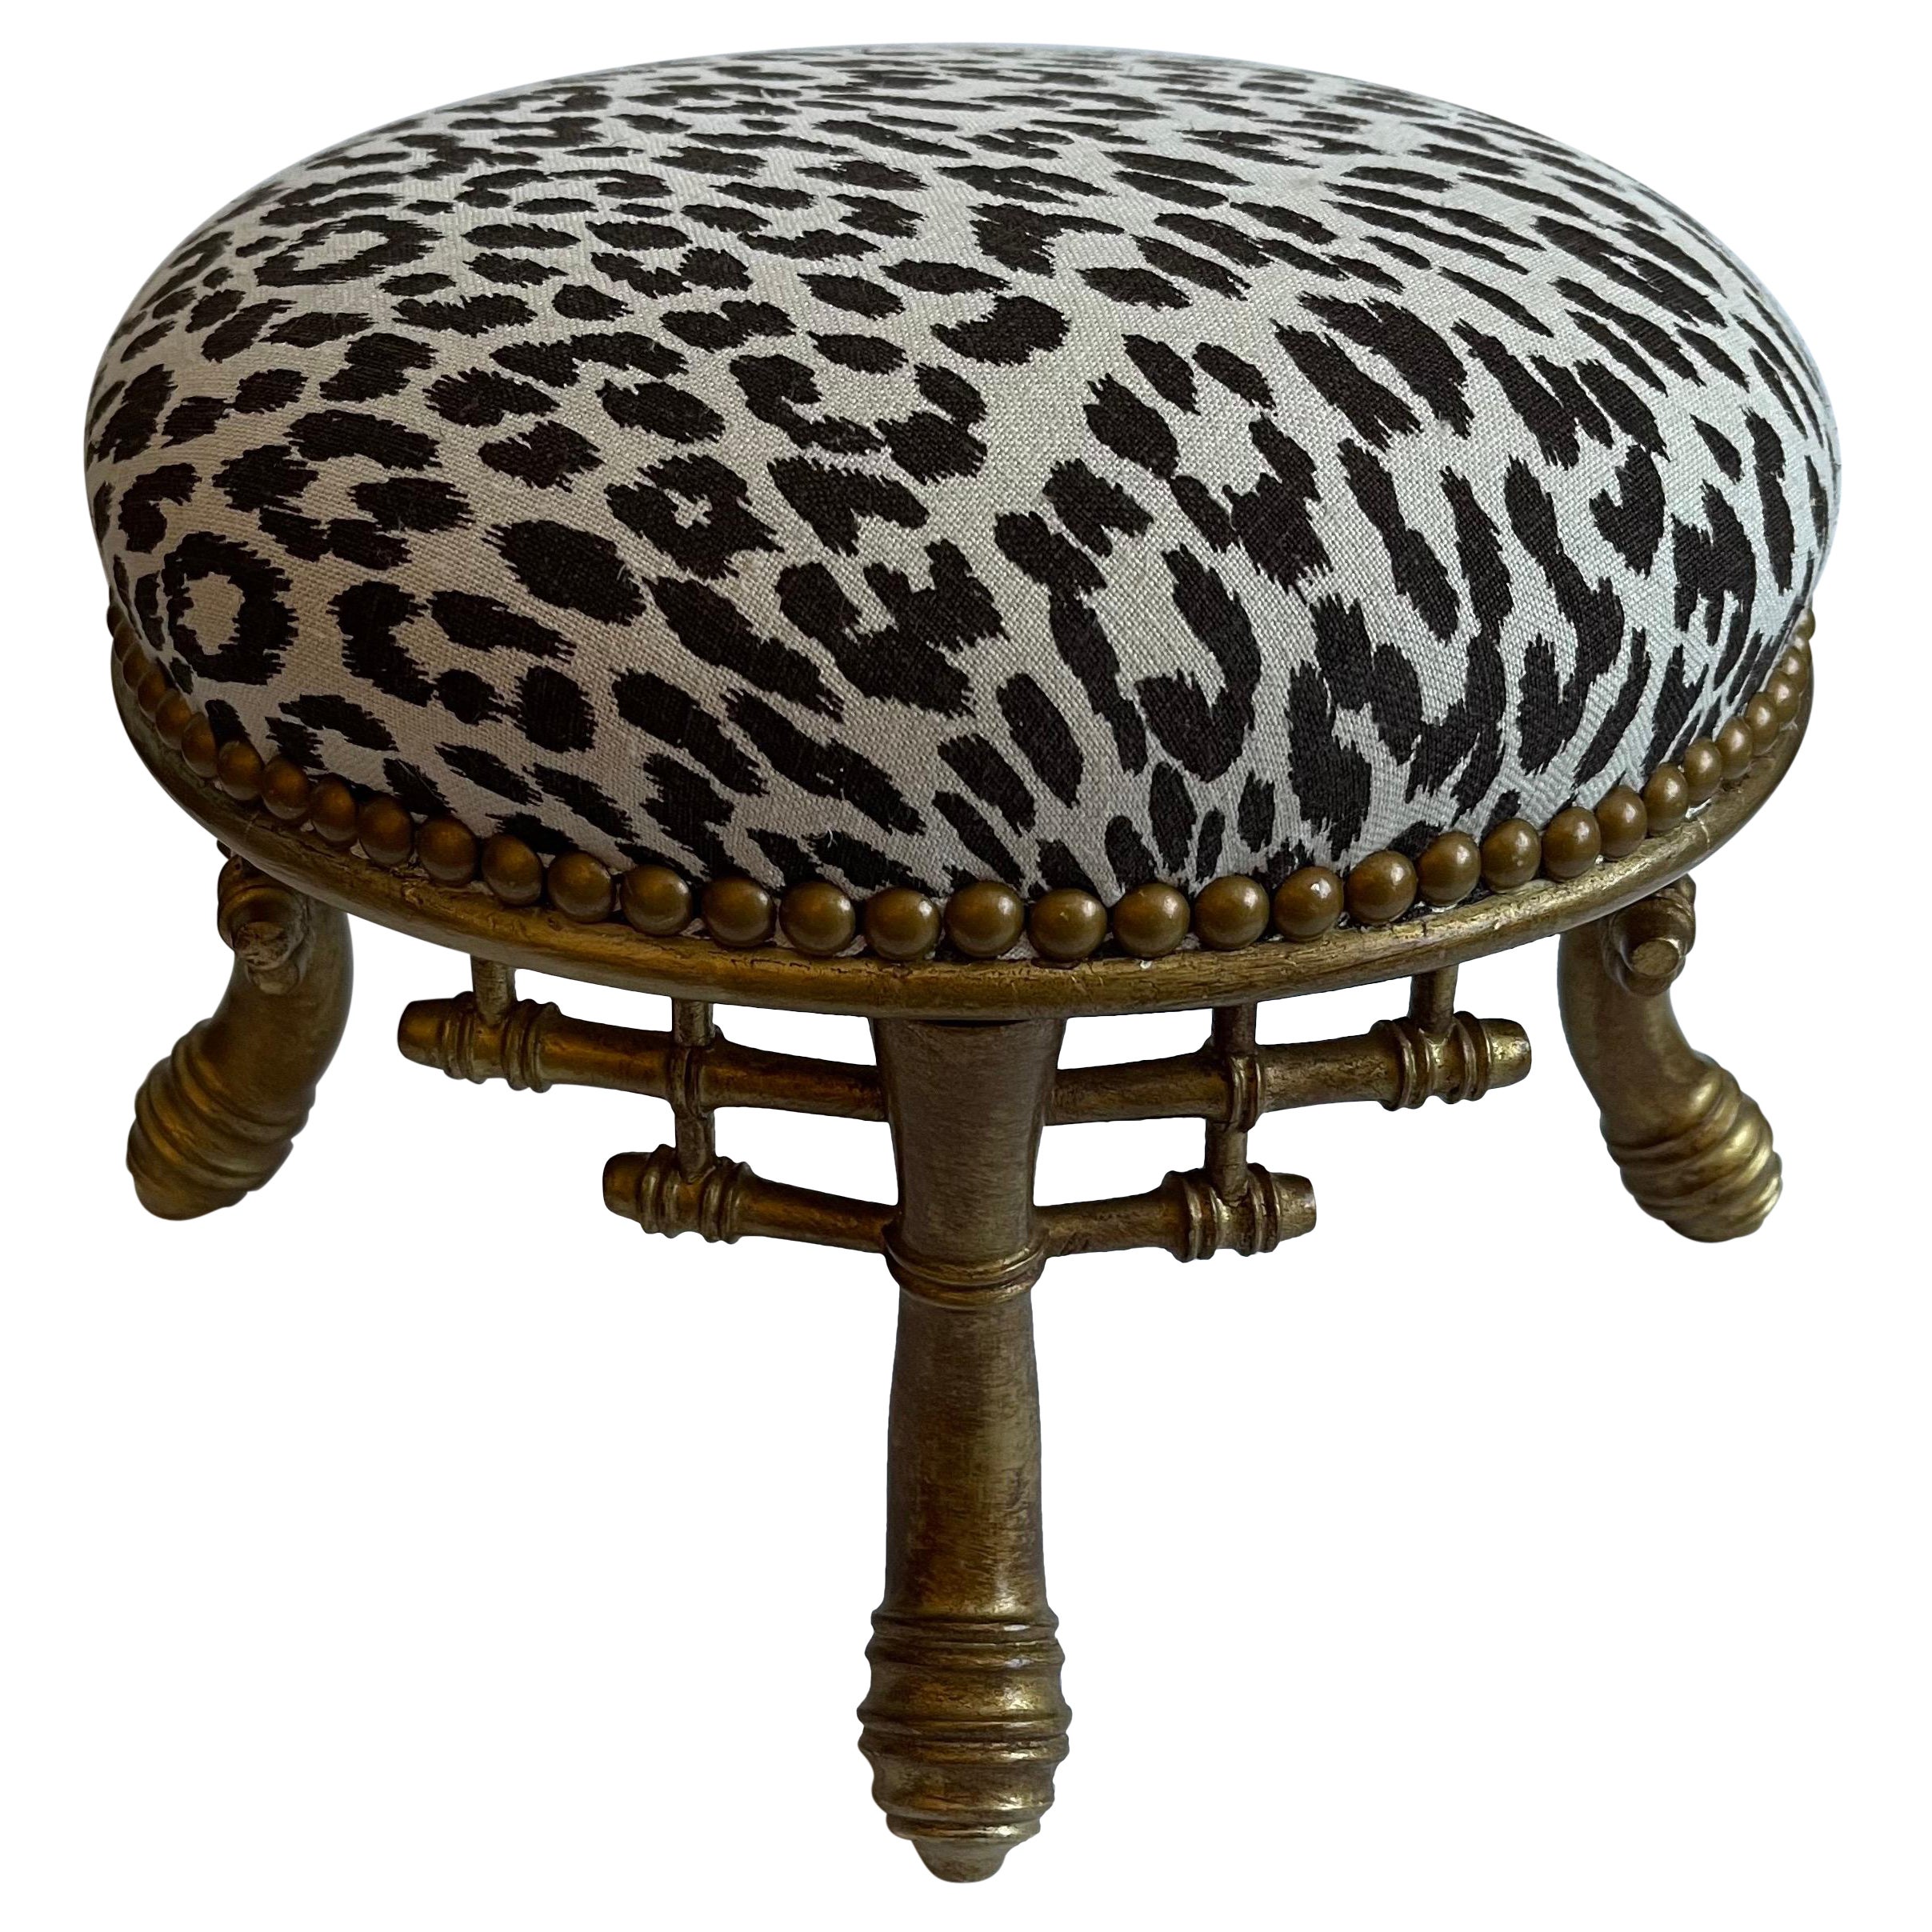 Giltwood Chinoiserie Bamboo Leopard Round Footstool